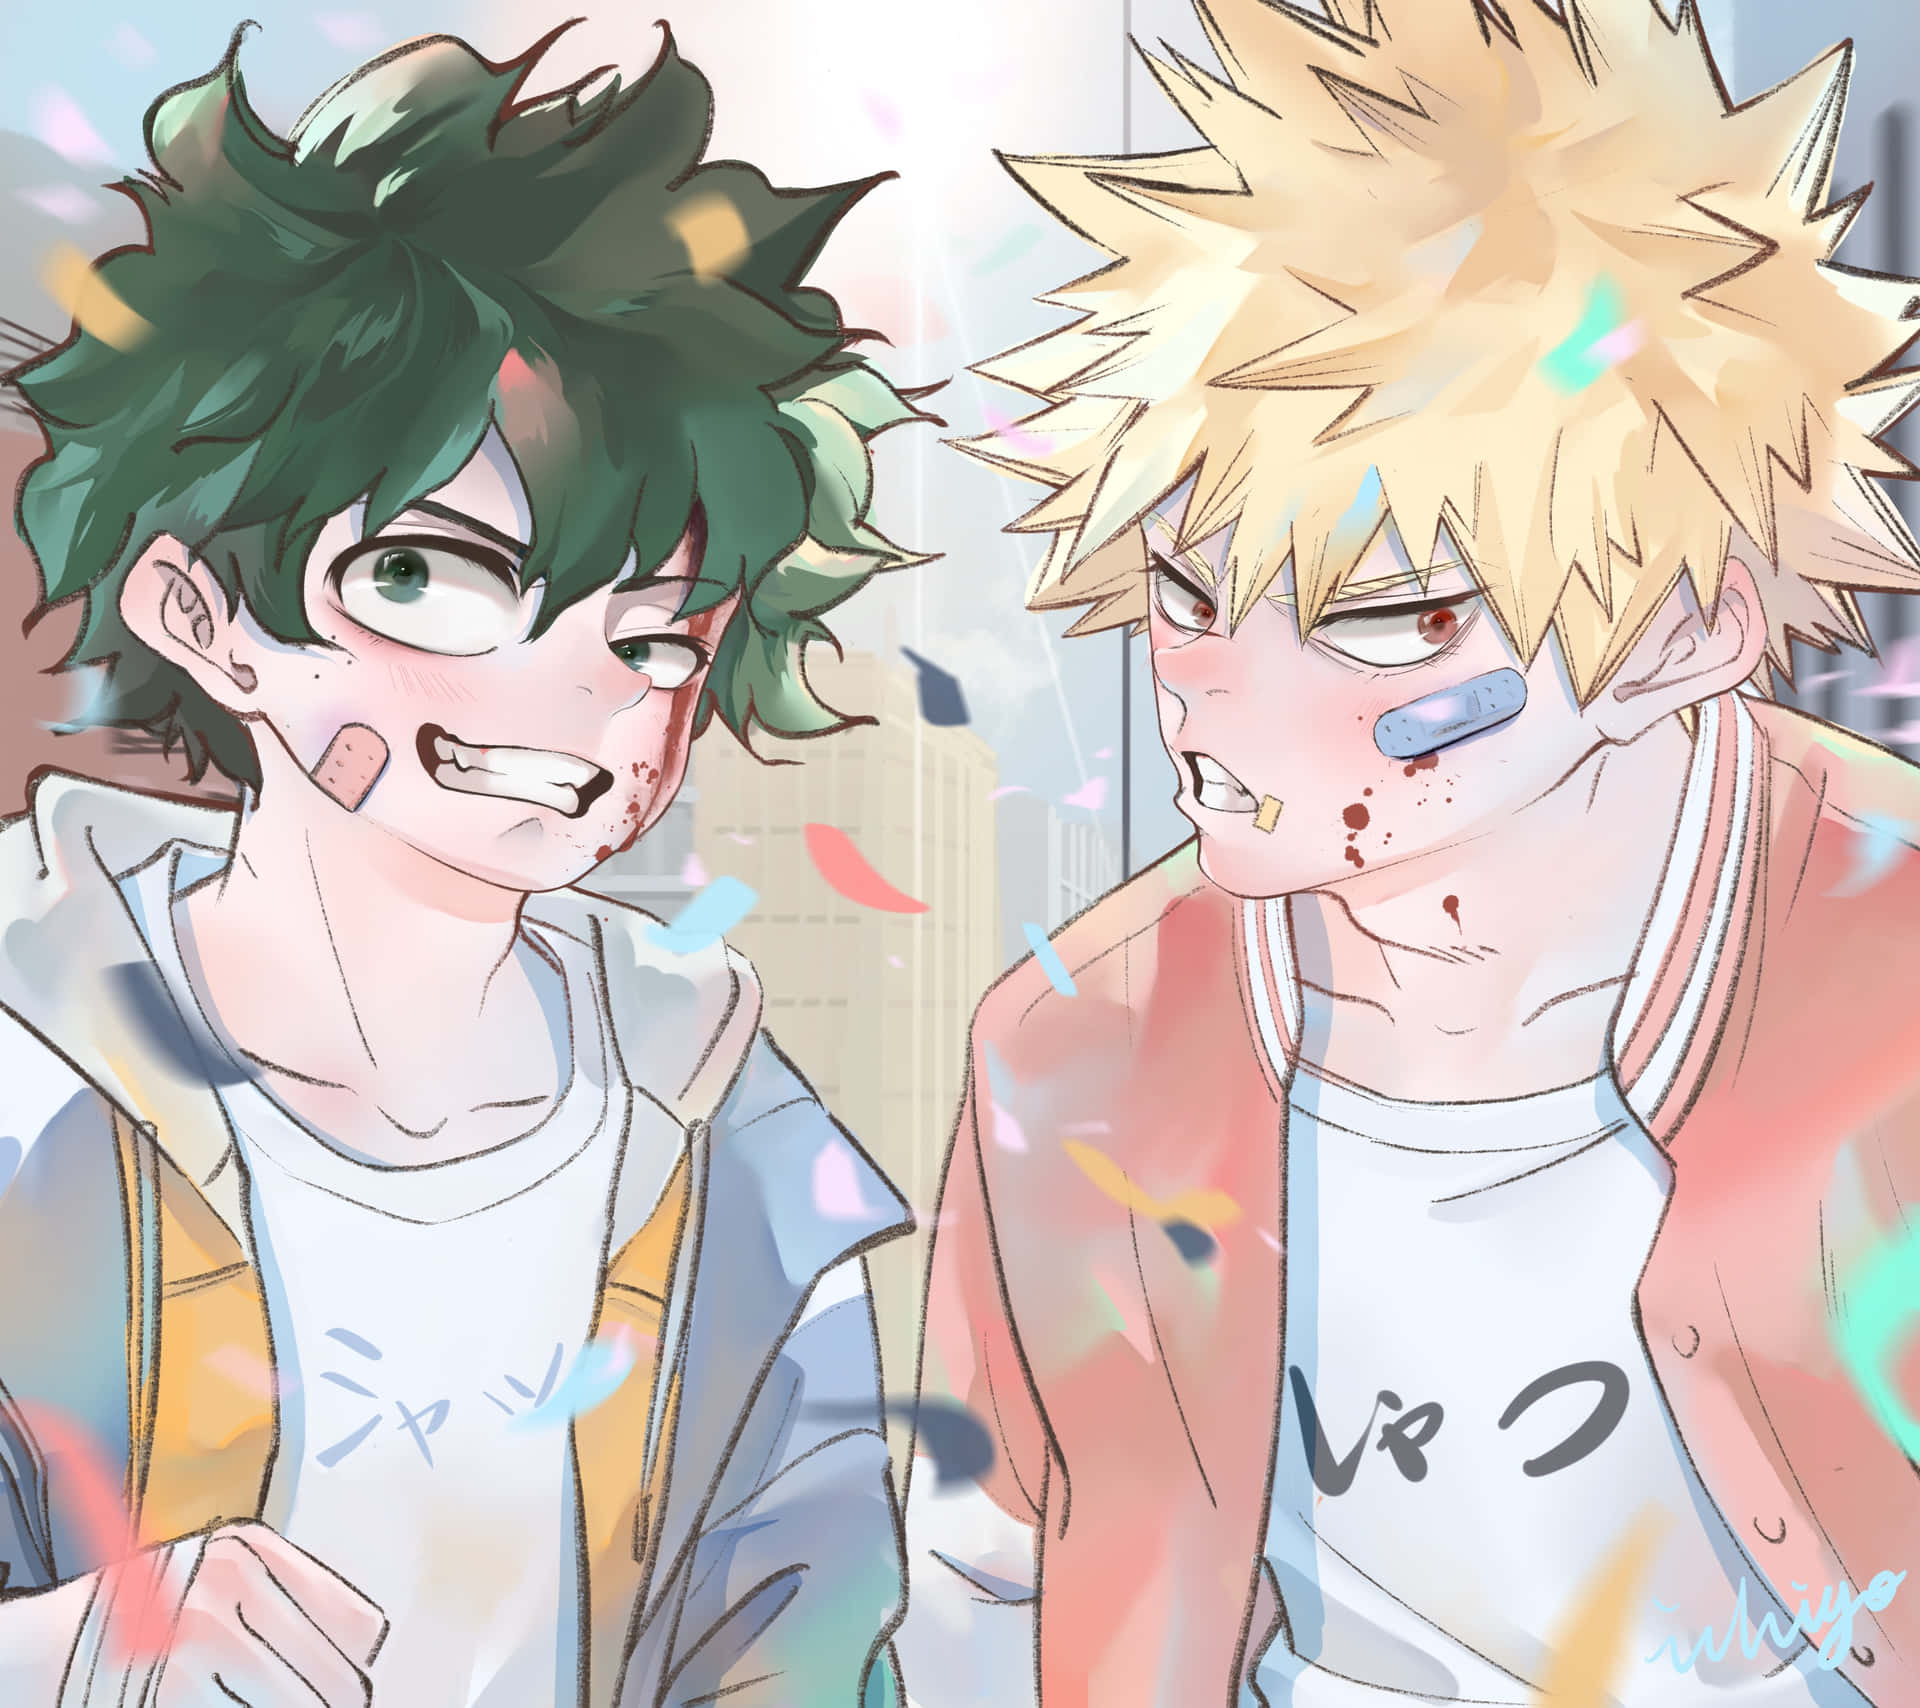 Download Cute Deku And Bakugou Wounded Faces Picture | Wallpapers.com